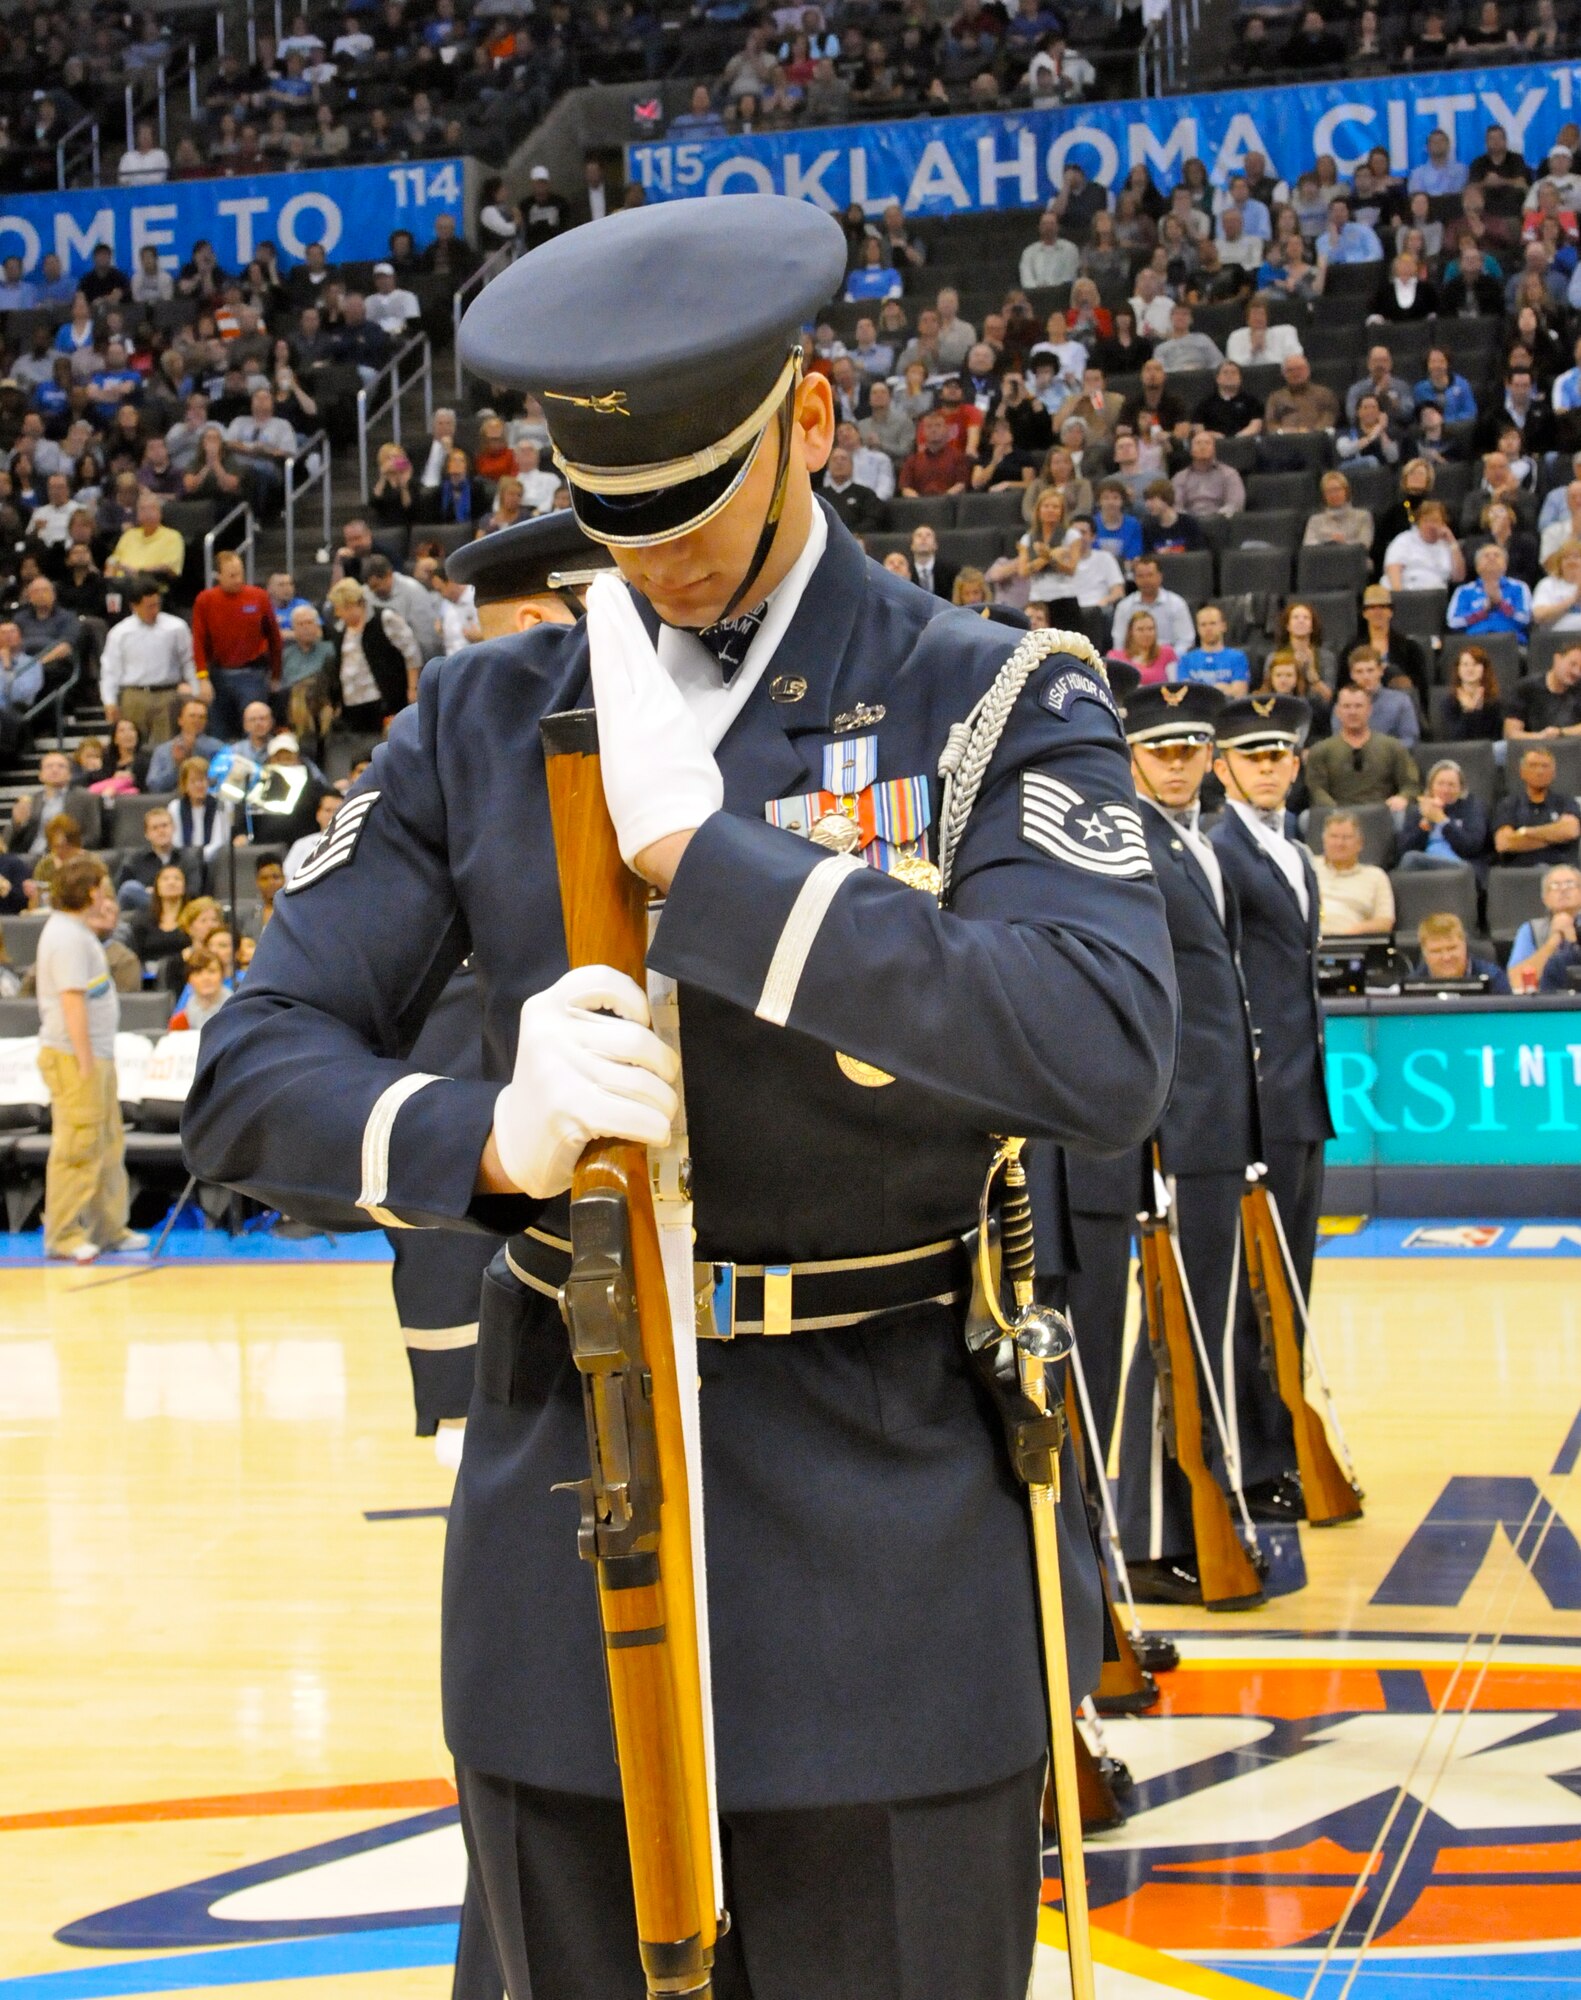 Tech. Sgt. Michael Doss, member of The U.S. Air Force Honor Guard drill team, performs the halftime show Feb. 15 on the Oklahoma City Thunder quart for military appreciation night. The performance is Sergeant Doss’ final performance with drill team. (U.S. Air Force photo by Airman 1st Class Tabitha N. Haynes)